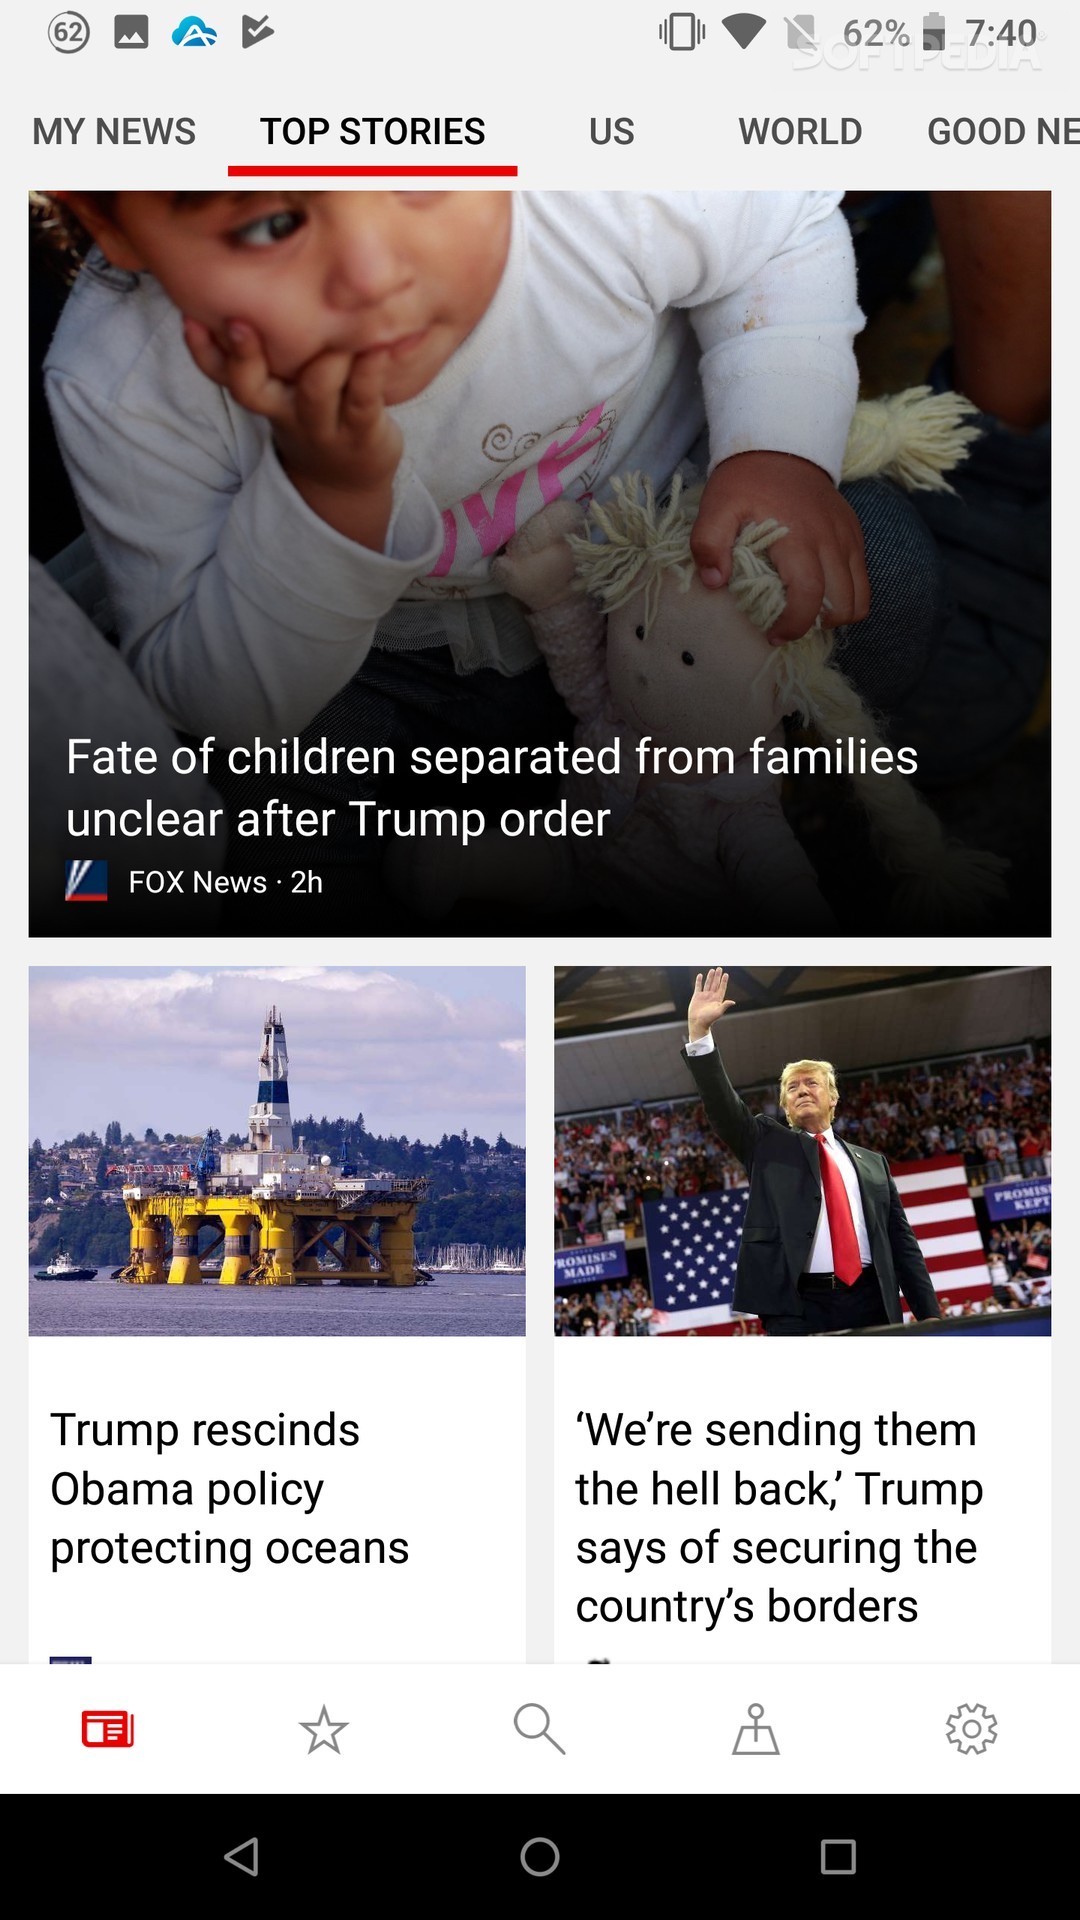 Microsoft Launches Microsoft News App for iPhone and Android